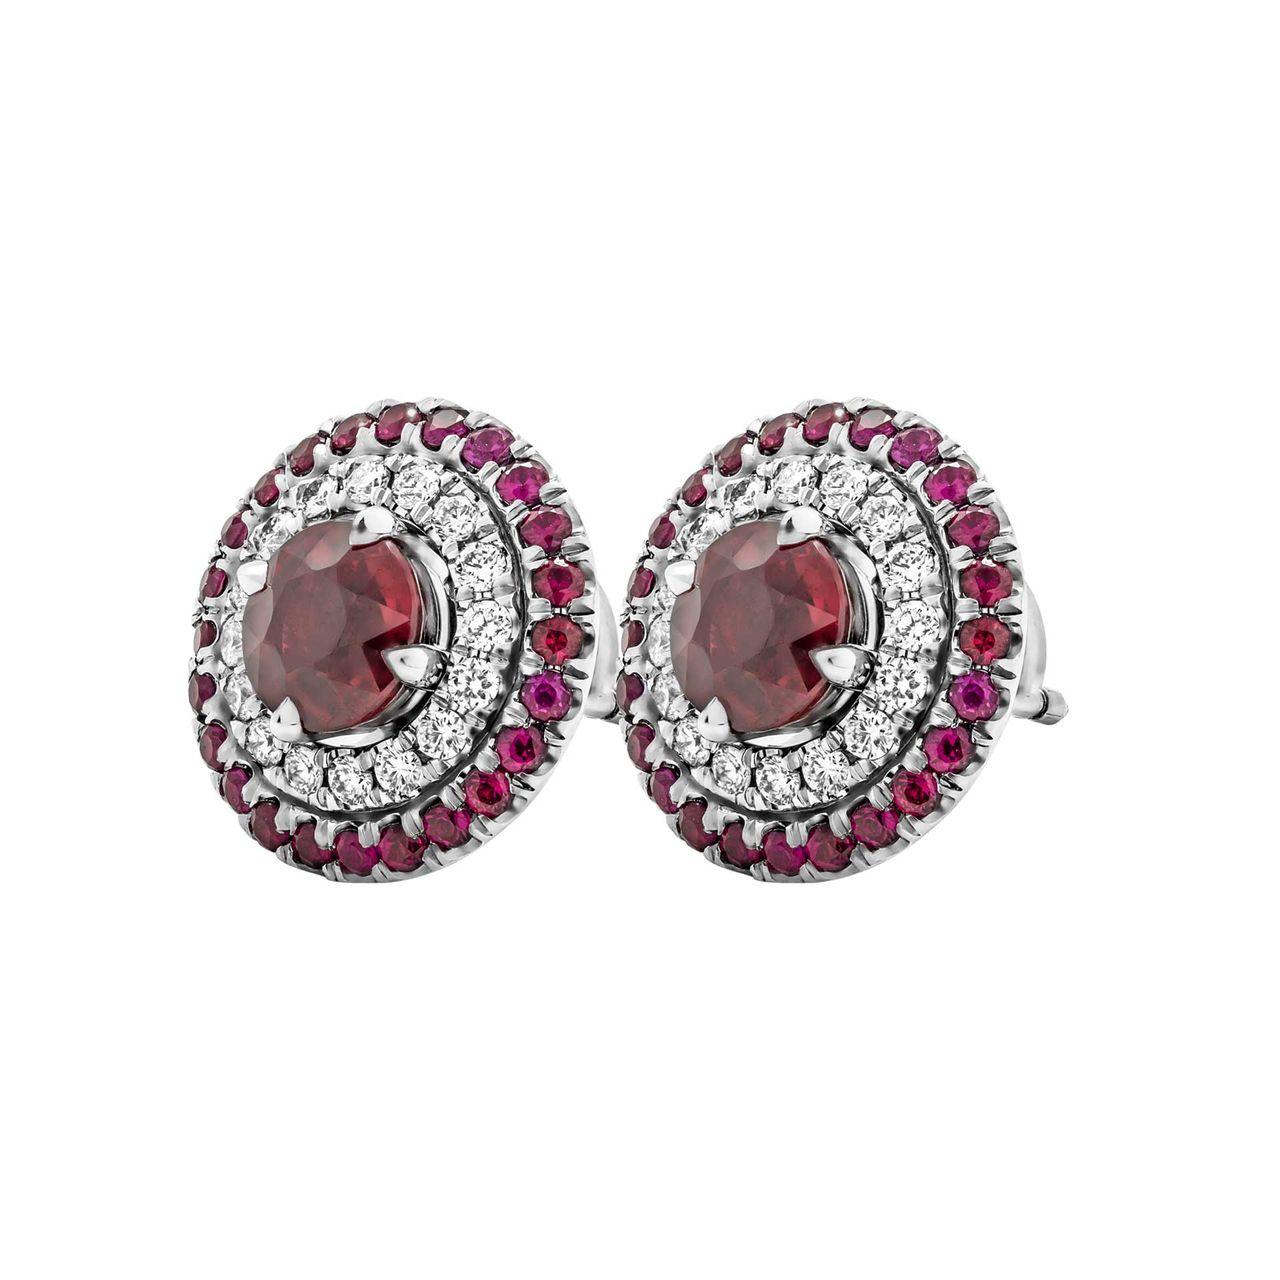 Ruby Earrings with Halo diamond jackets in Platinum 
Centers: 
1.20ct Round Ruby GIA#5191369644 
1.16ct Round Ruby GIA#2191369668
Removable jackets , can be worn as studs
Total carat weight of diamonds: 0.3ct
Total carat weight of rubies: